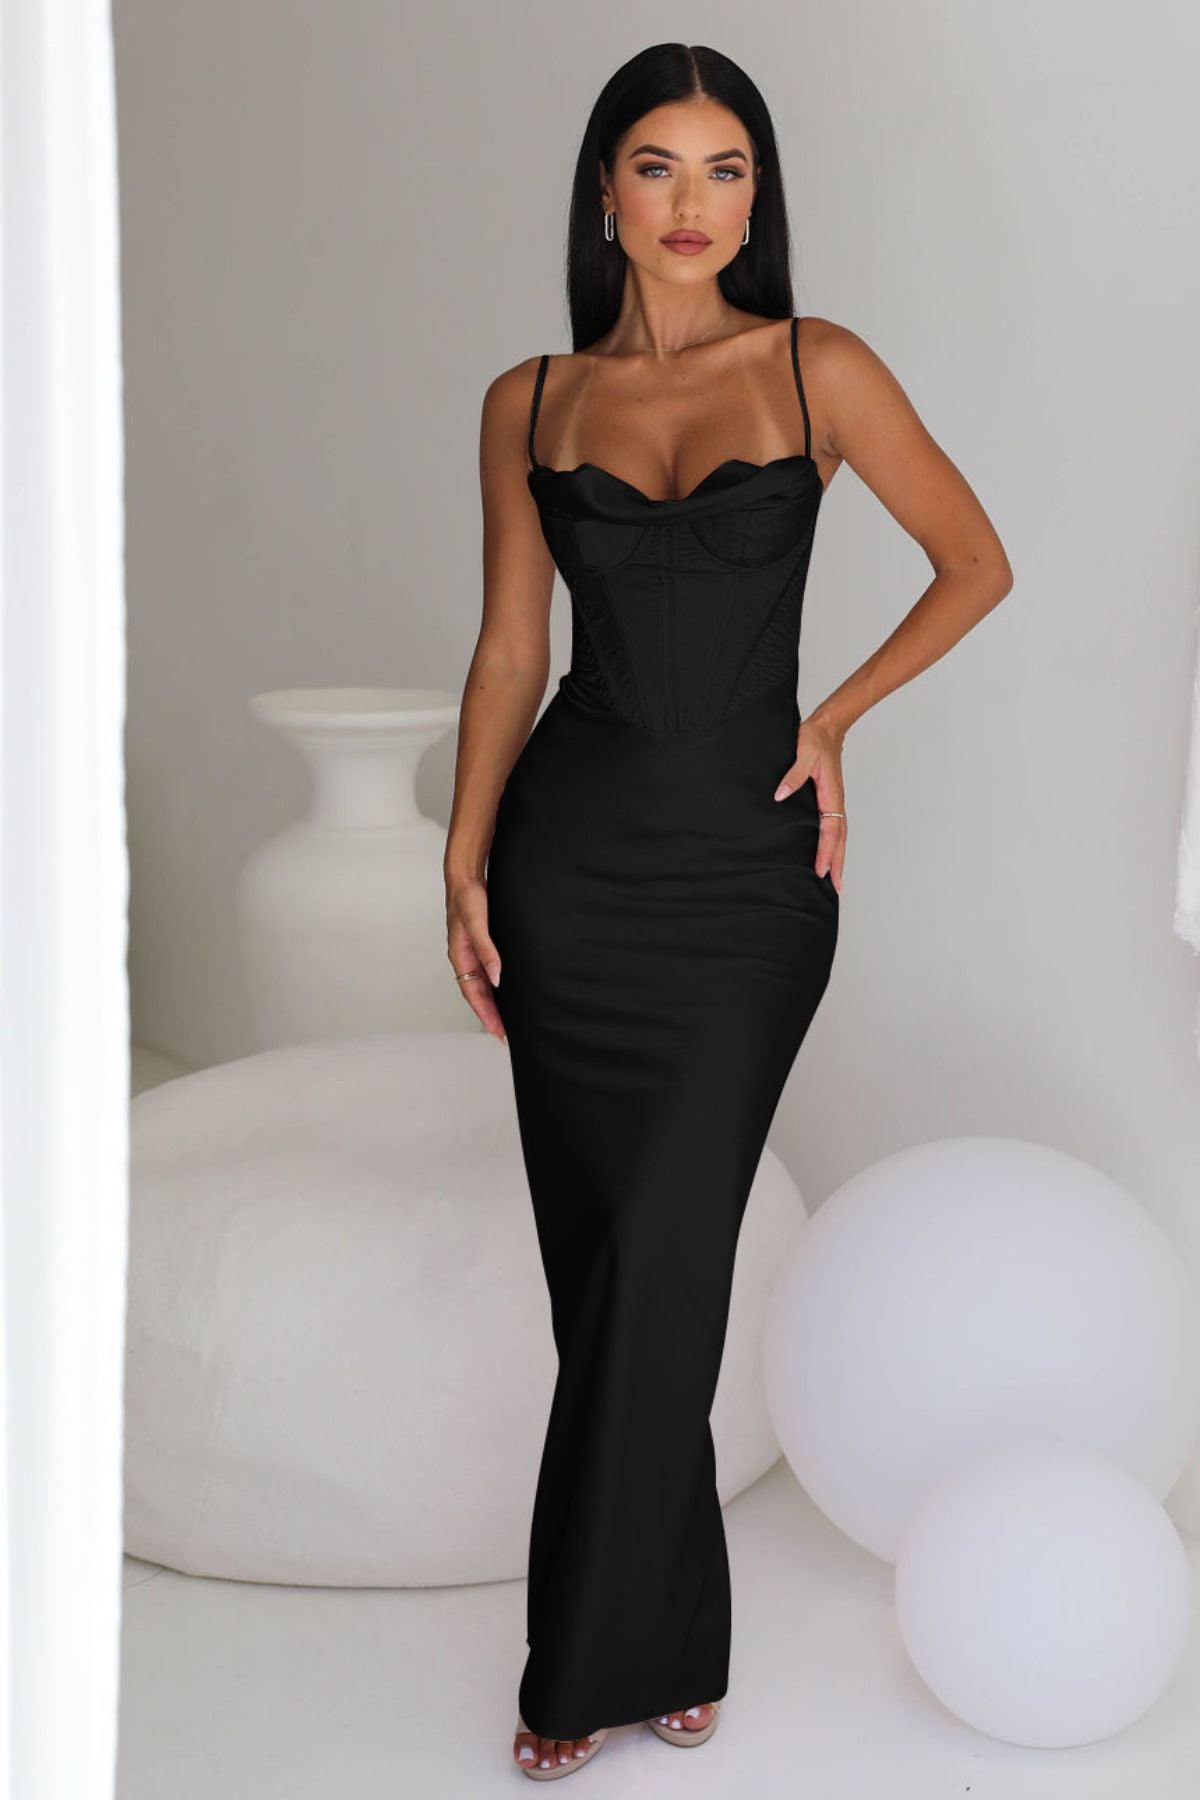 Chic black sexy tight corset dress In A Variety Of Stylish Designs